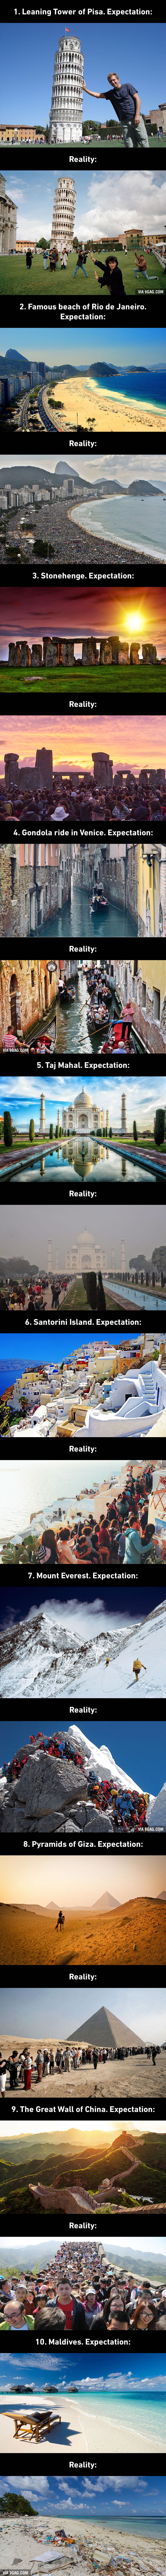 Top 10 Travel Expectations Vs Reality Which May Make You Rethink Your Vacation